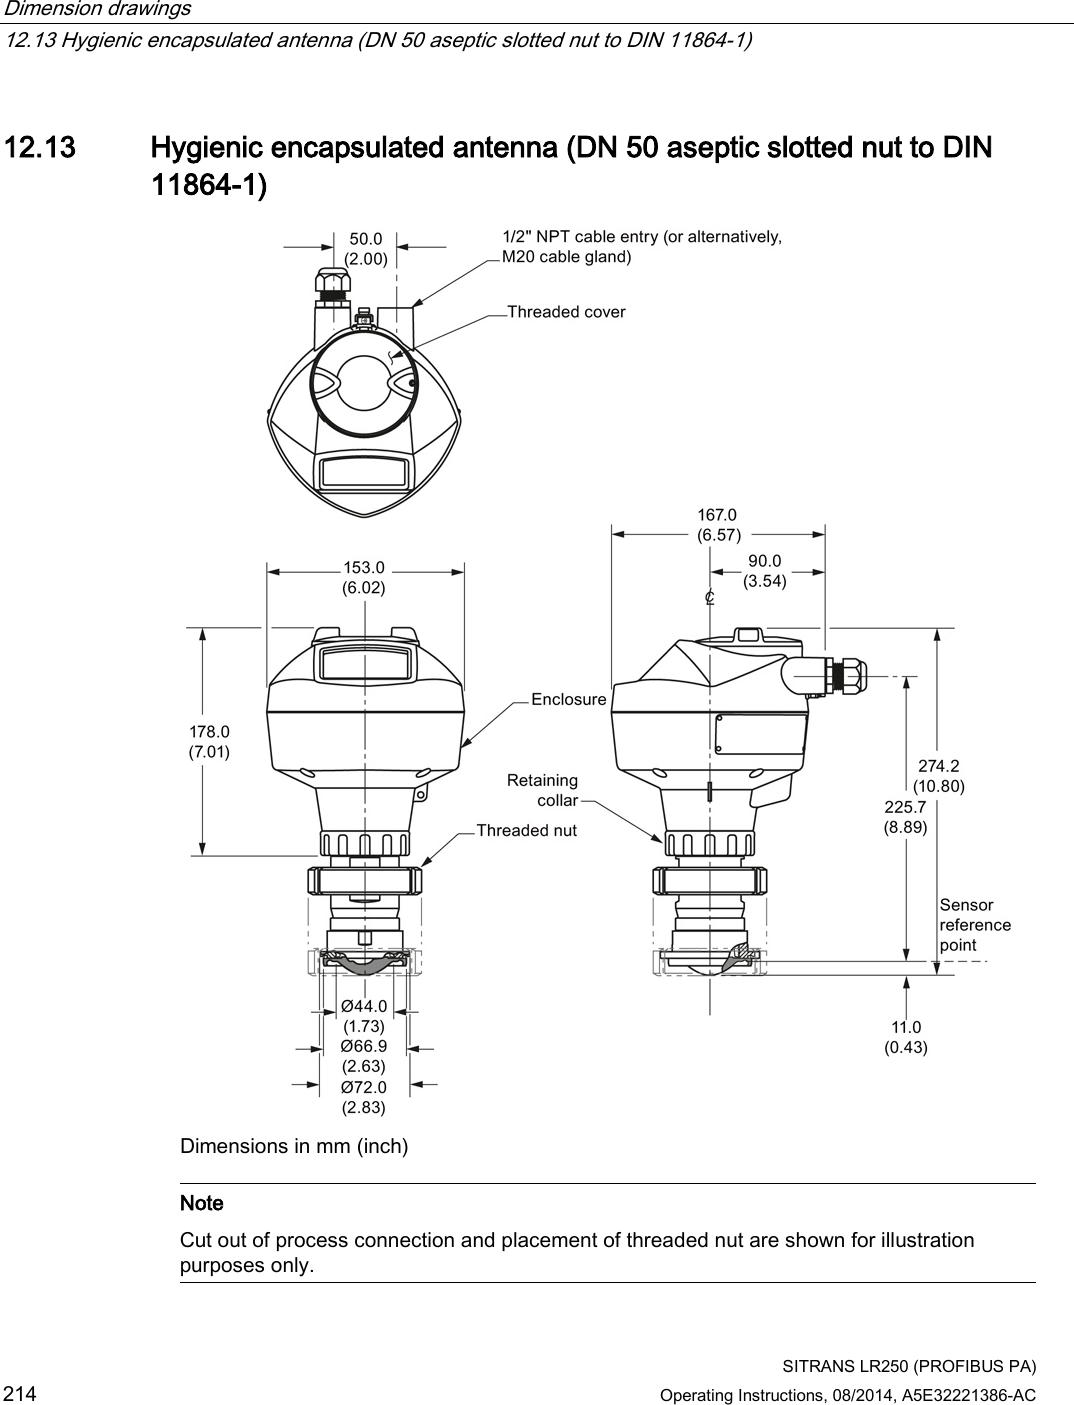 Dimension drawings   12.13 Hygienic encapsulated antenna (DN 50 aseptic slotted nut to DIN 11864-1)  SITRANS LR250 (PROFIBUS PA) 214 Operating Instructions, 08/2014, A5E32221386-AC  12.13 Hygienic encapsulated antenna (DN 50 aseptic slotted nut to DIN 11864-1)  Dimensions in mm (inch)   Note Cut out of process connection and placement of threaded nut are shown for illustration purposes only.  